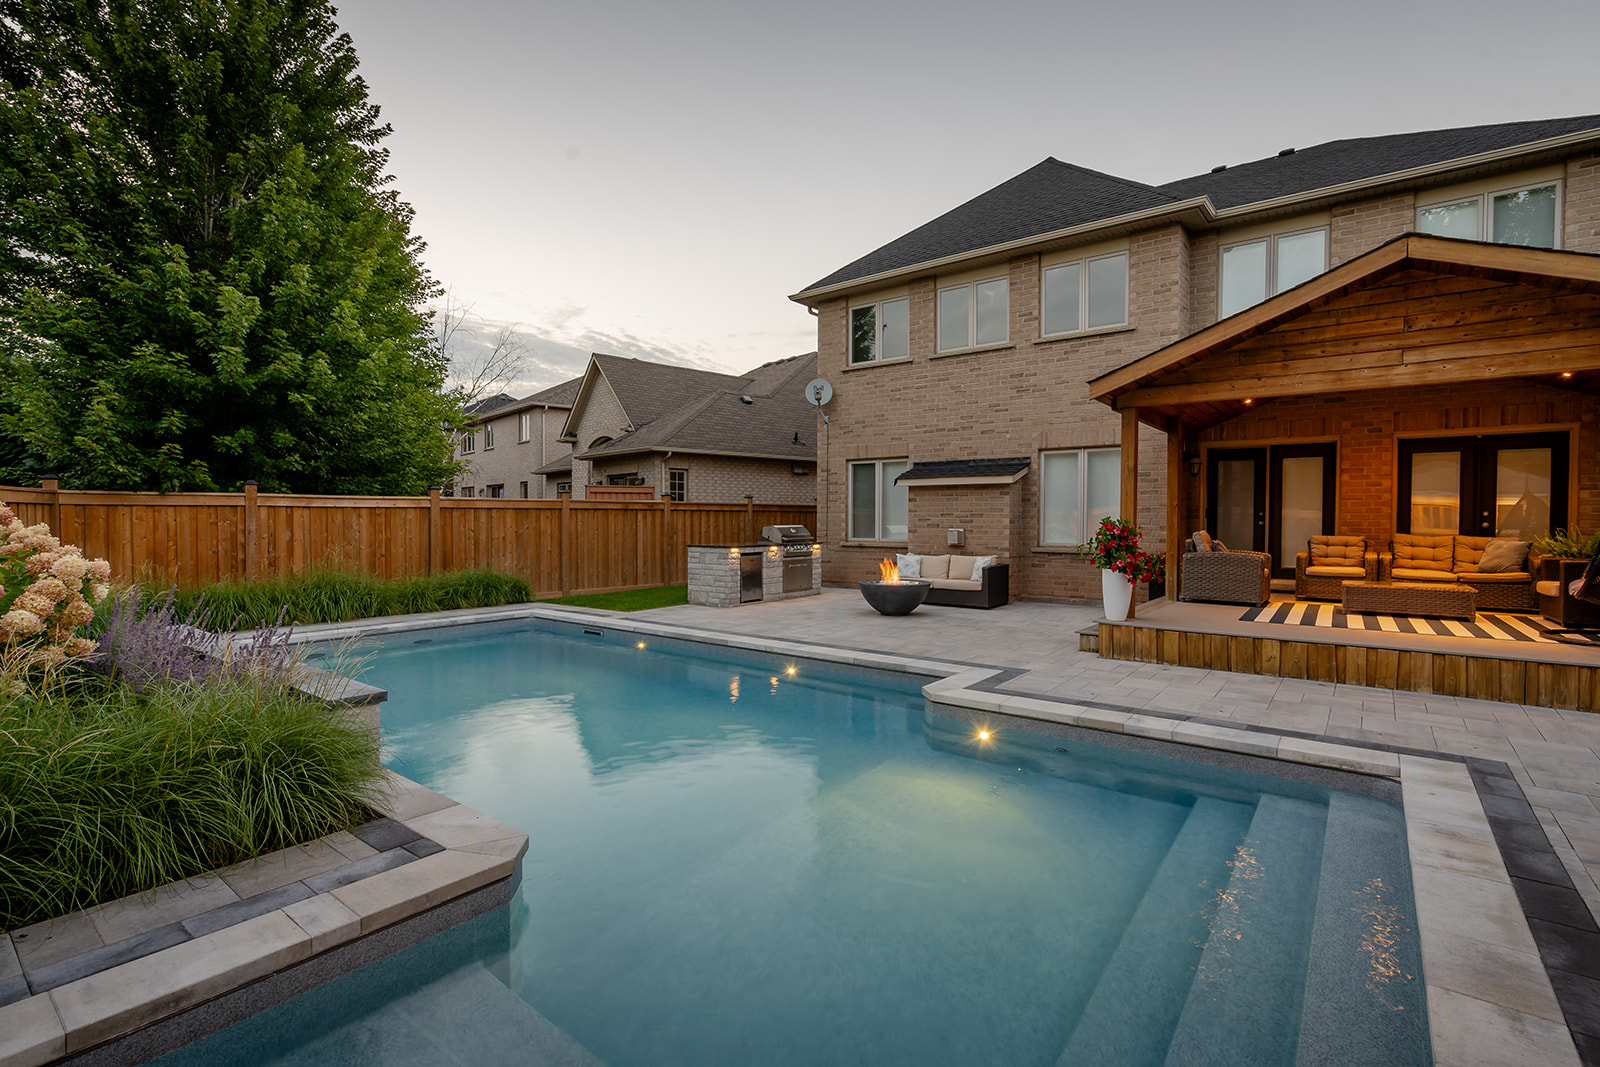 An inground pool with a fireplace on the far side of the backyard.